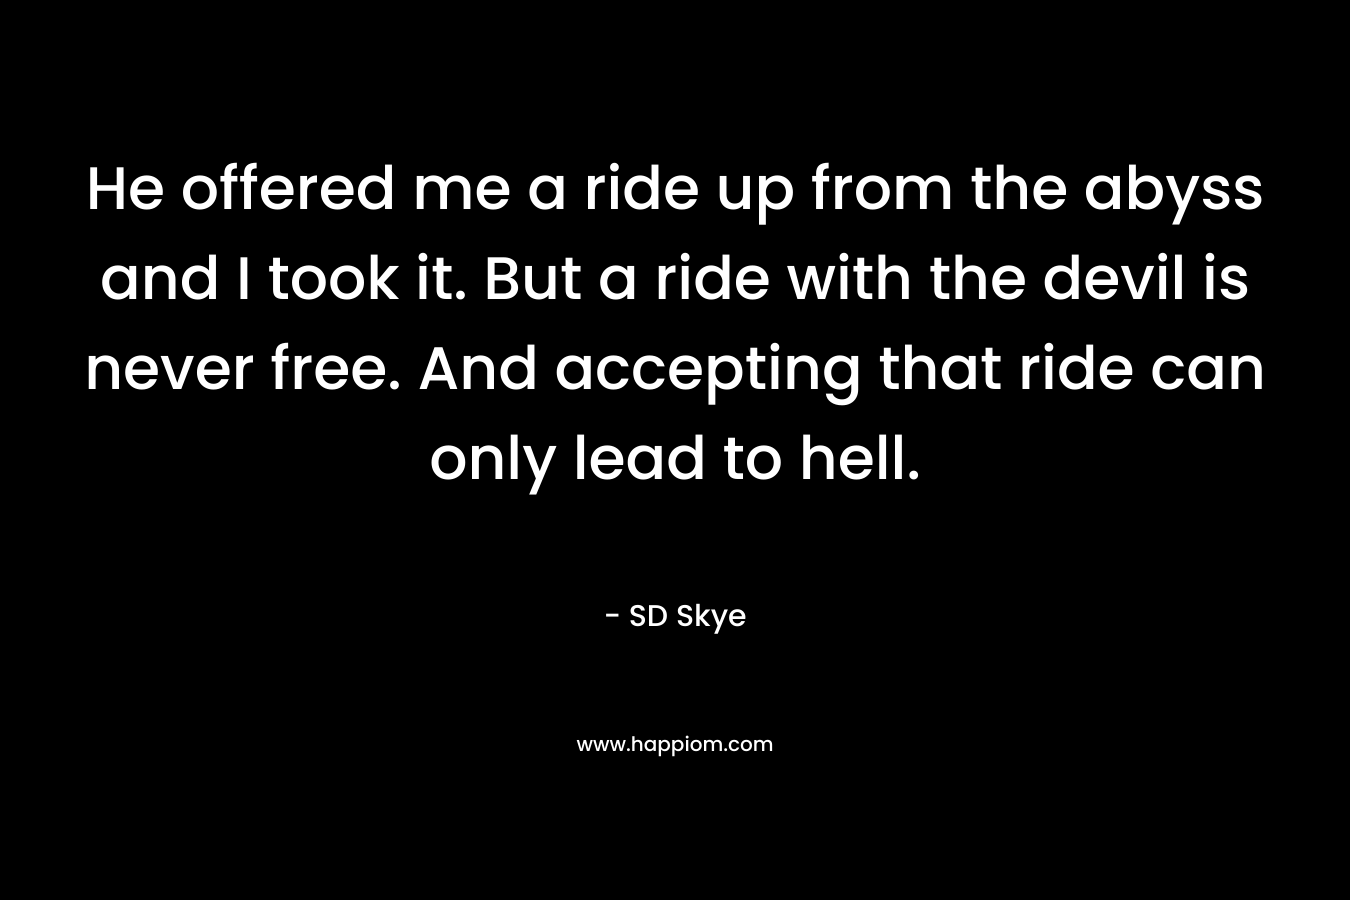 He offered me a ride up from the abyss and I took it. But a ride with the devil is never free. And accepting that ride can only lead to hell. – SD Skye